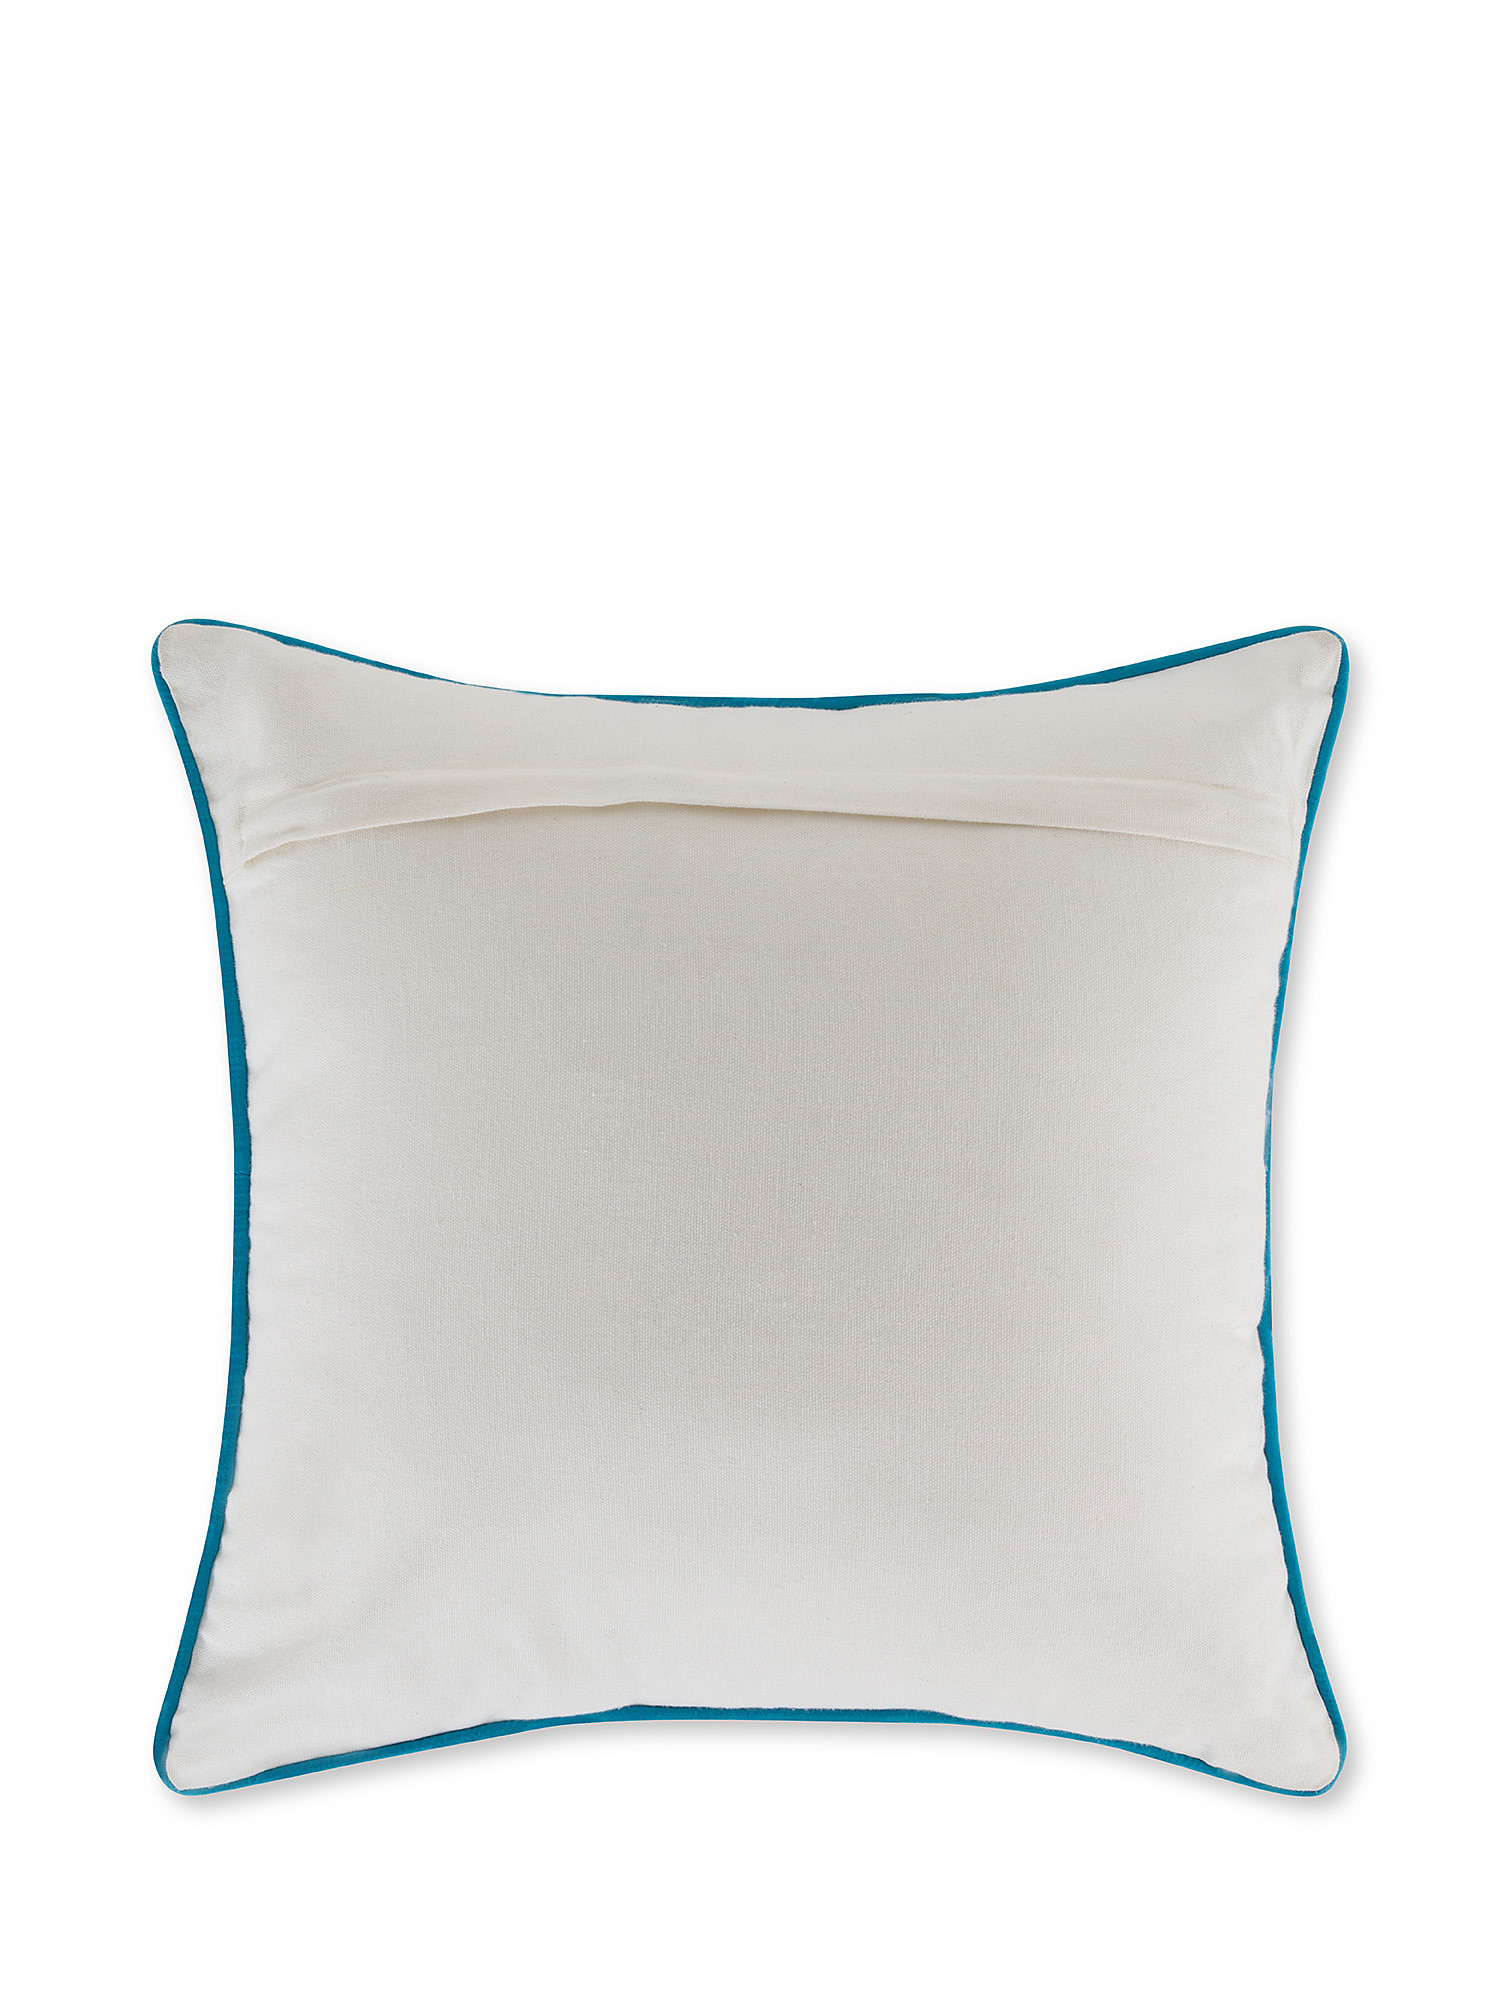 Fish embroidery cushion 45x45cm, Light Blue, large image number 1